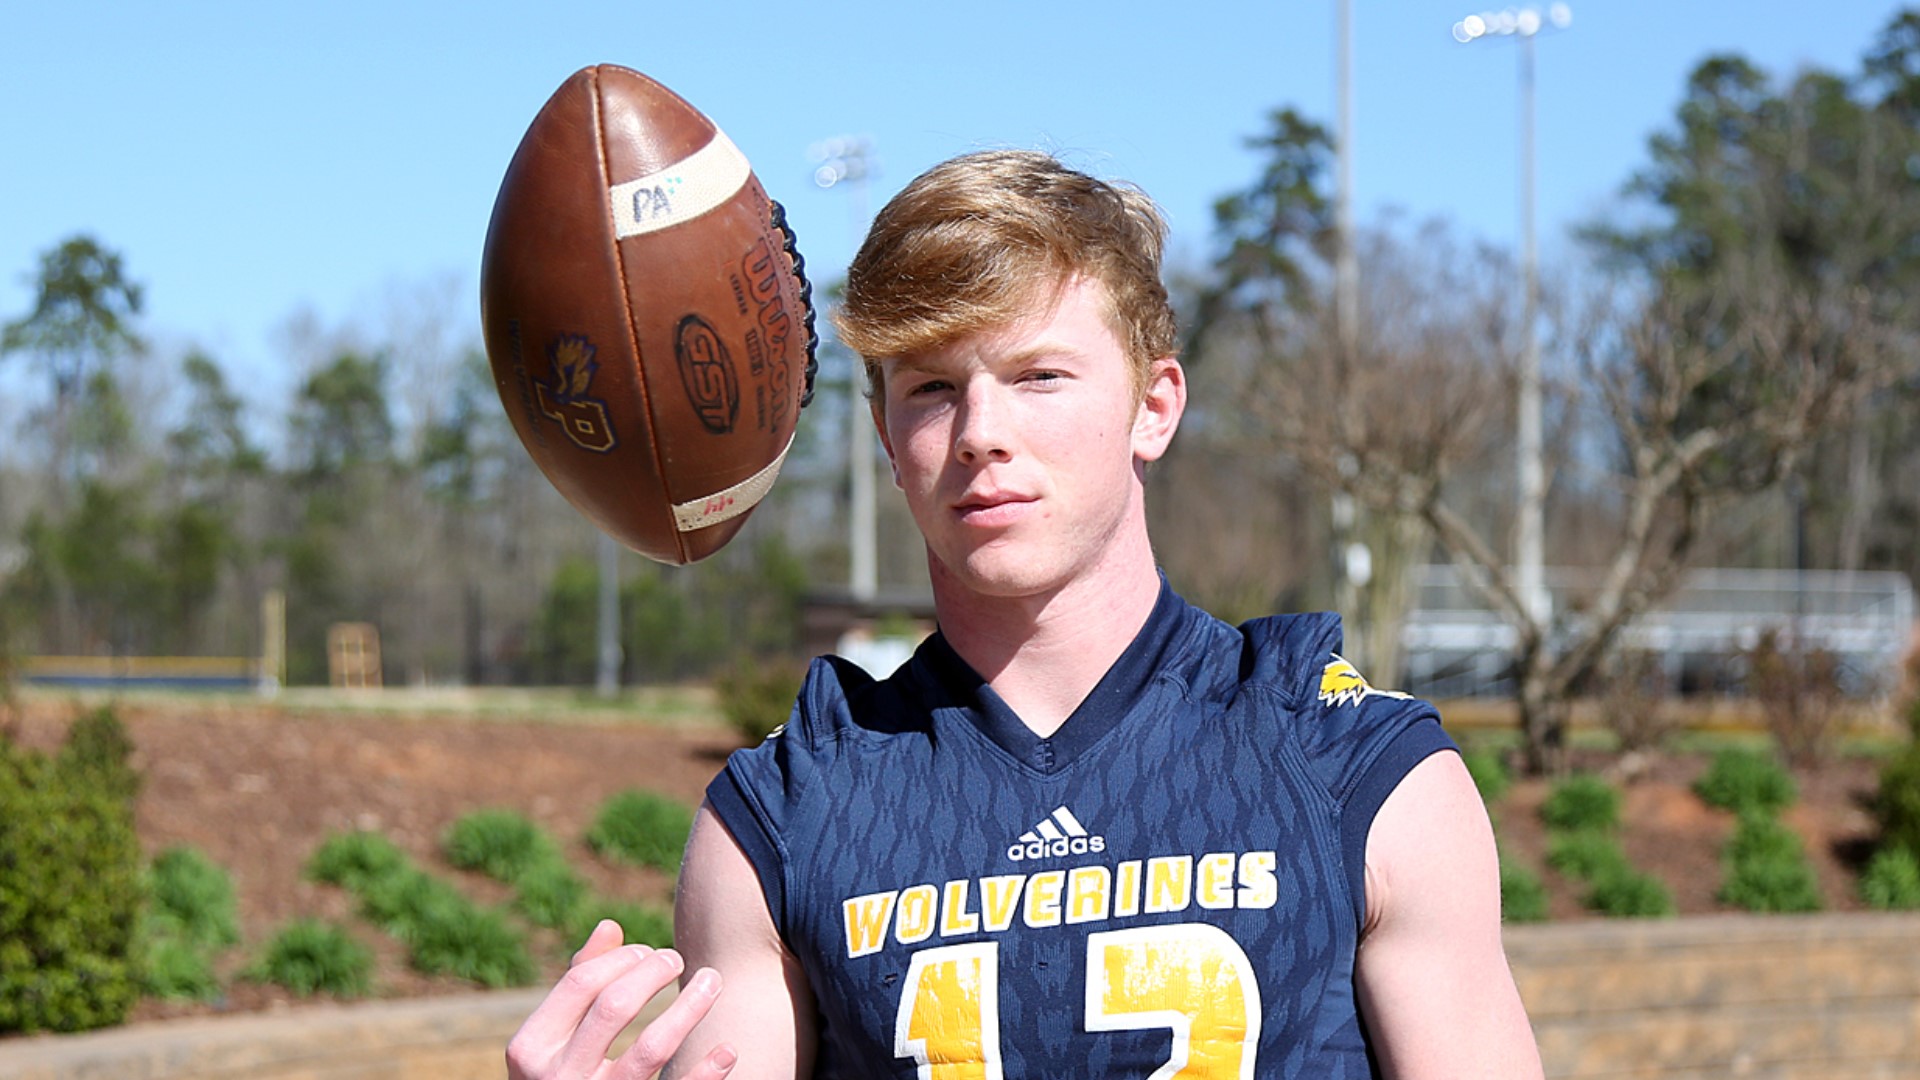 A UGA commit, Vandagriff threw 7 touchdown passes on Friday - five of those came in the first half alone.